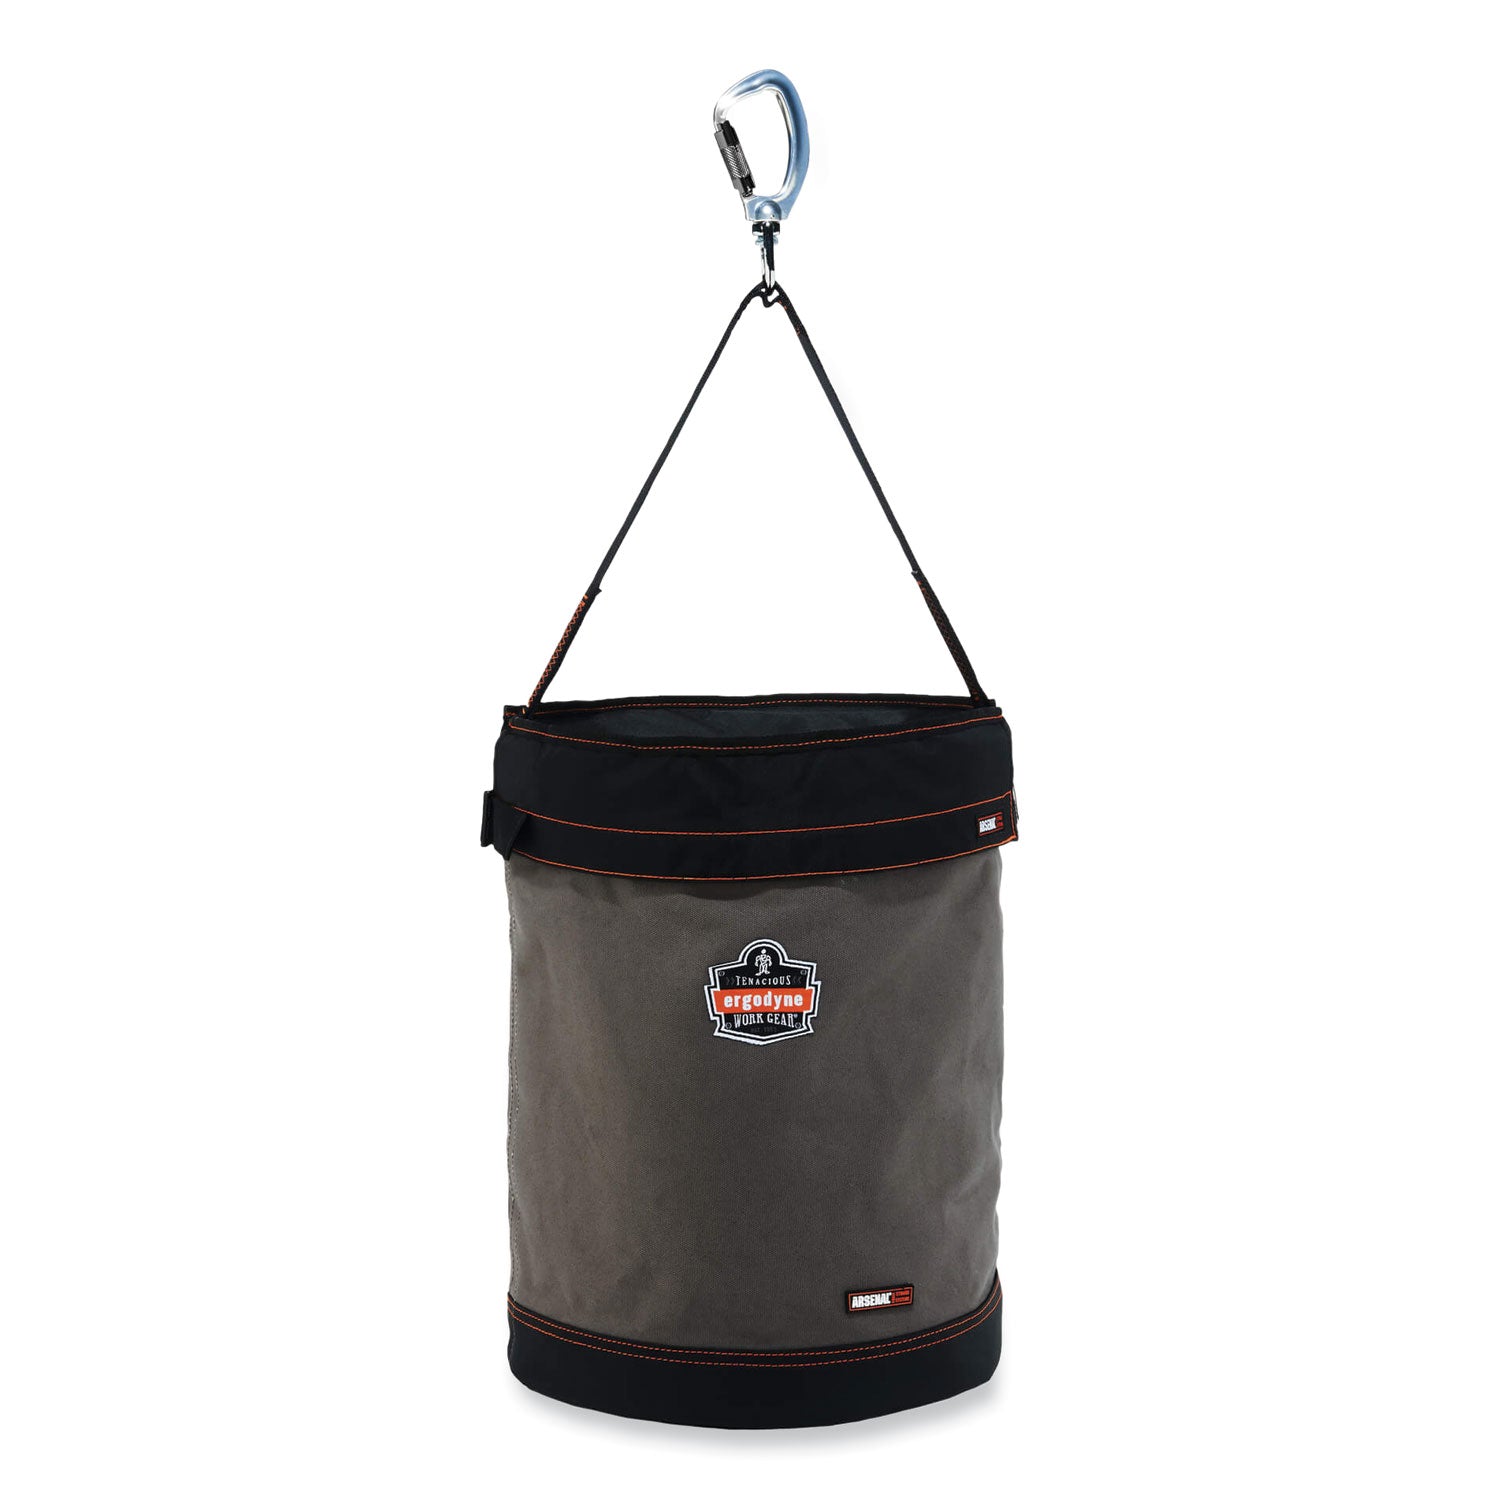 arsenal-5945t-extra-large-swiveling-carabiner-canvas-hoist-bucket-and-top-150-lb-gray-ships-in-1-3-business-days_ego14845 - 1